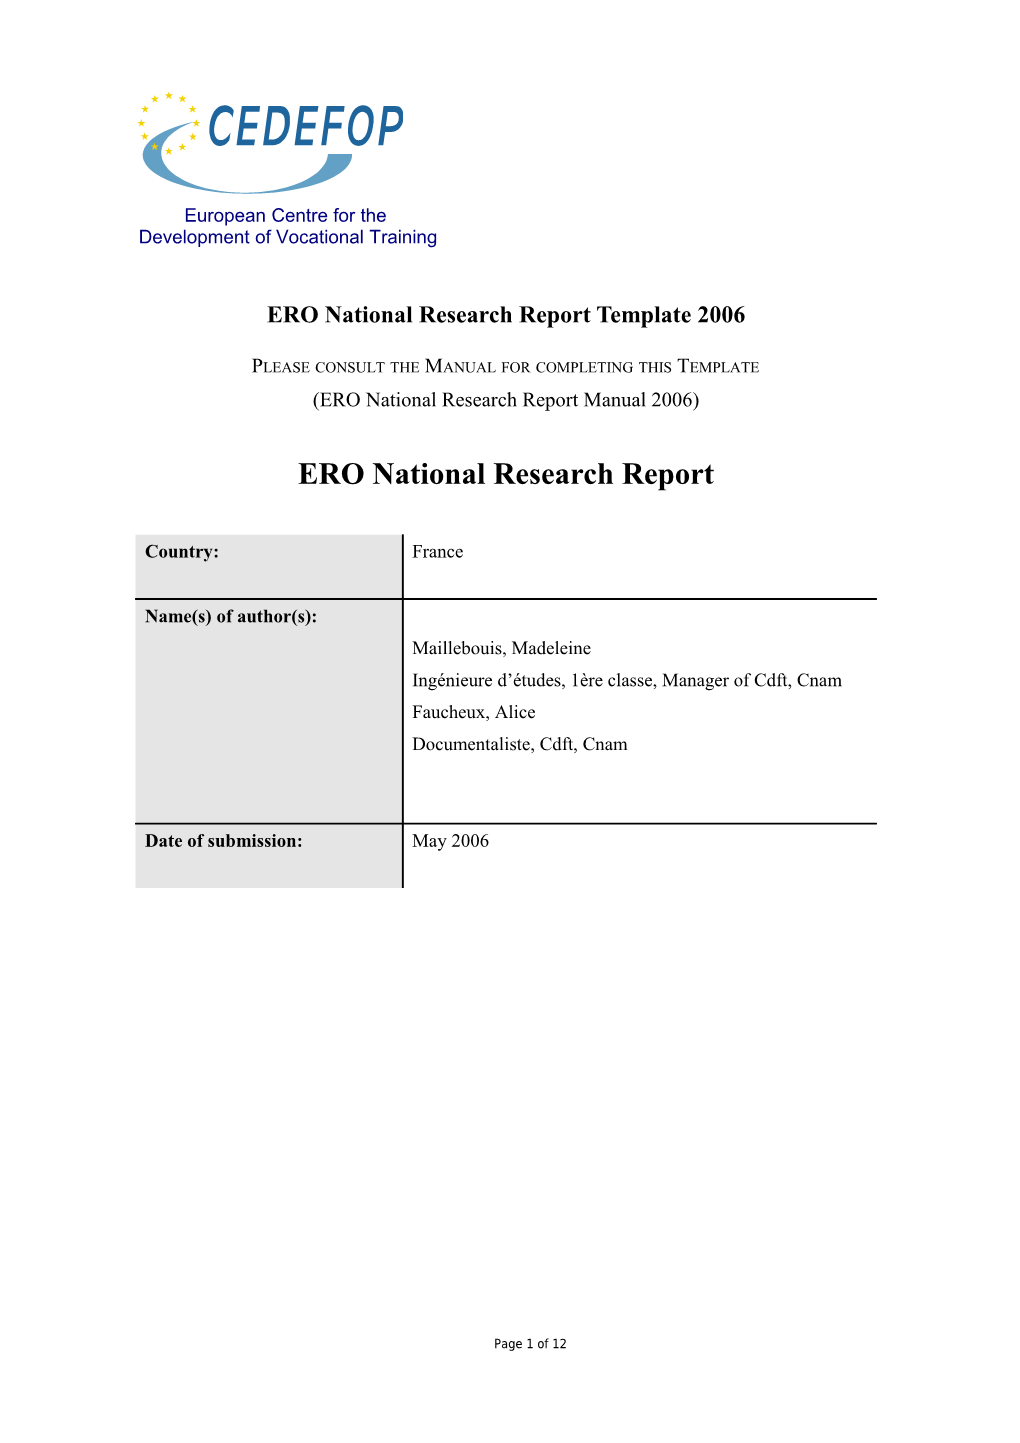 ERO National Research Report Template 2006